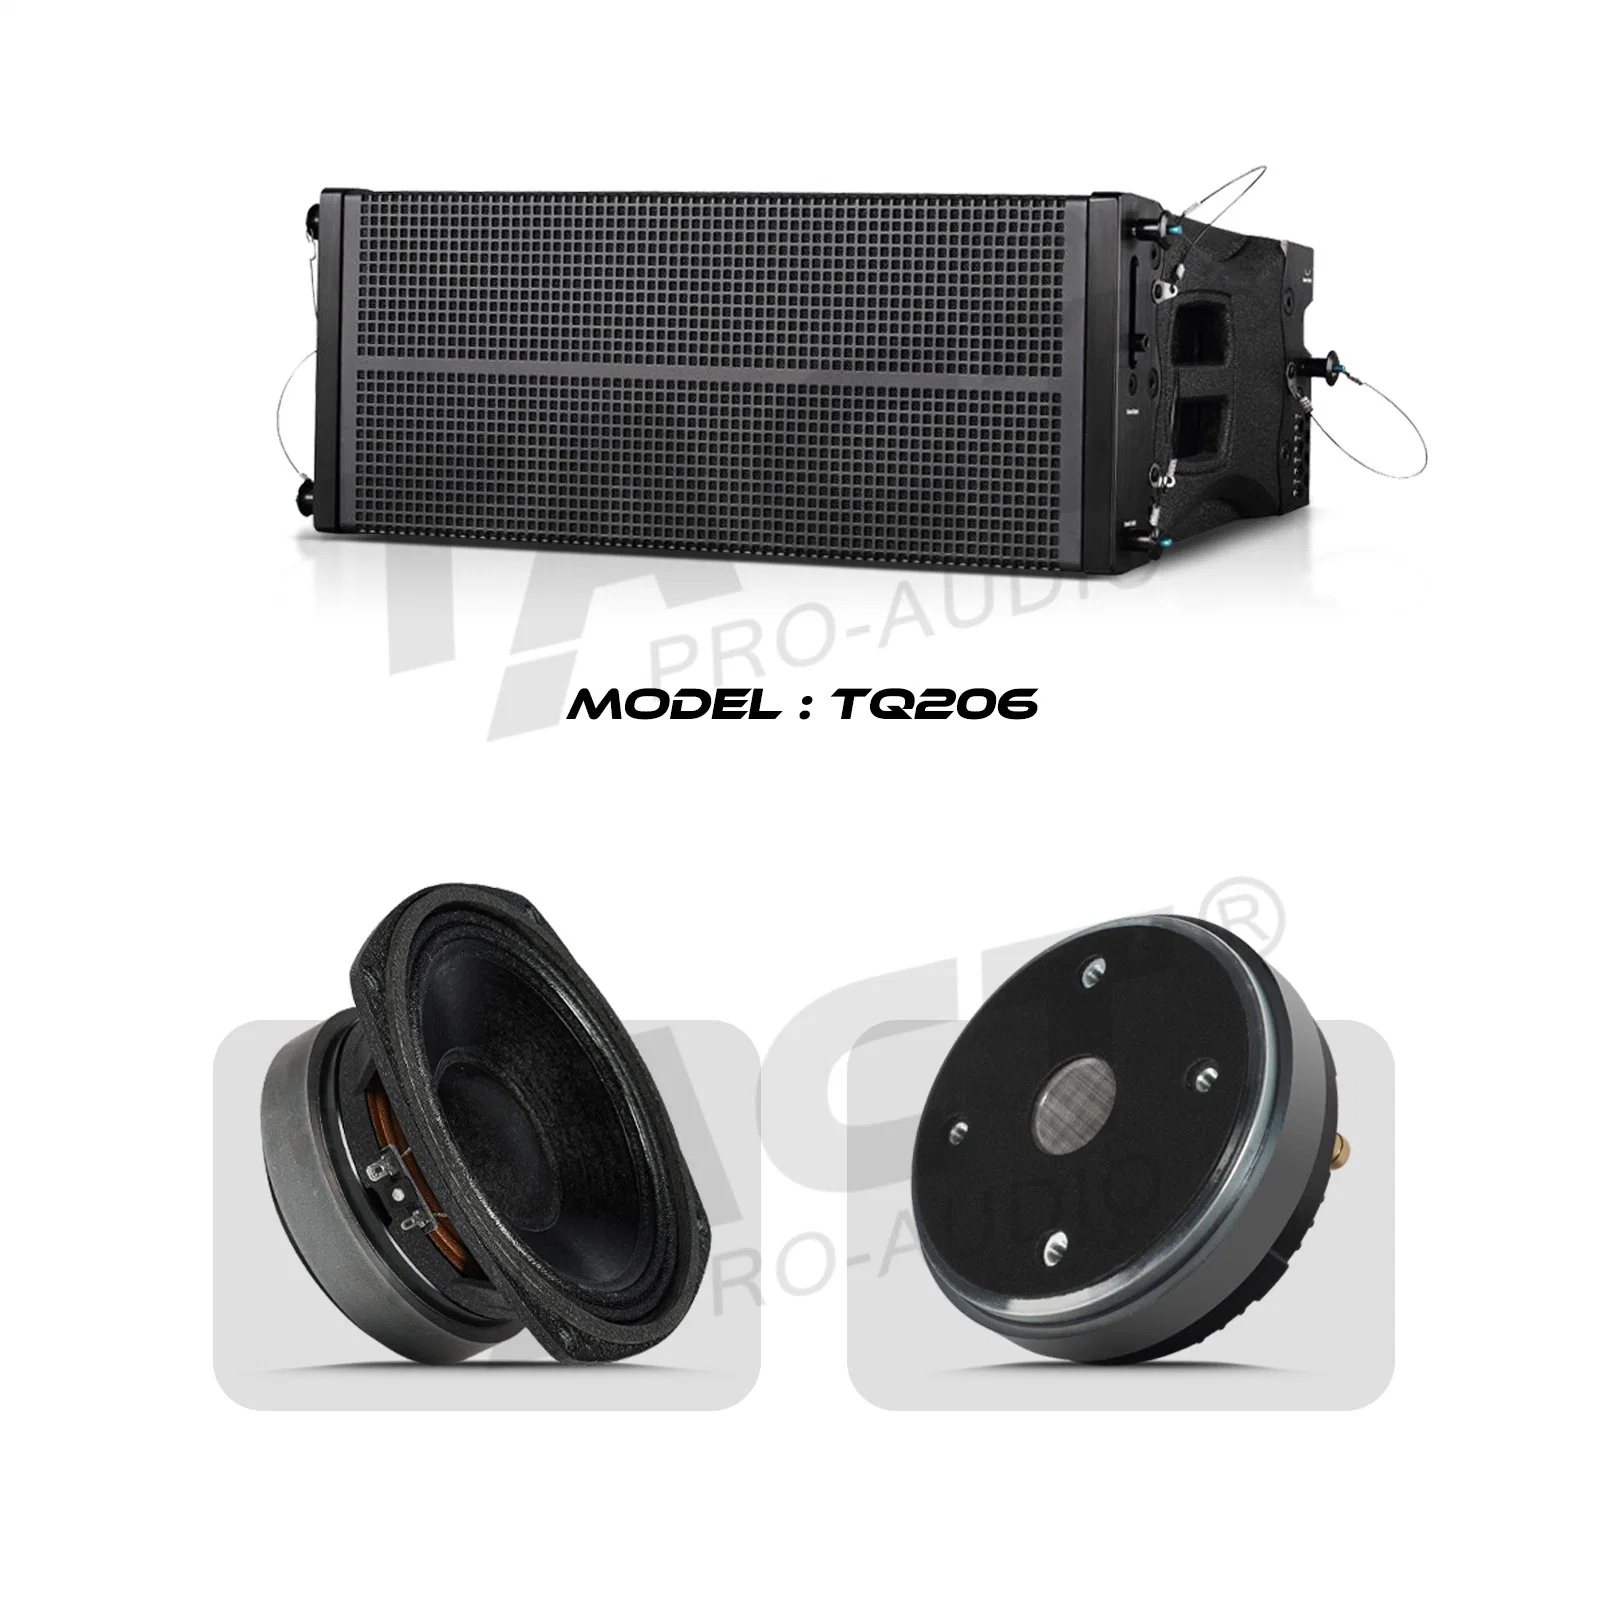 Professional Audio Tact Tq206 Line Array Speaker for Church, Conference Hall